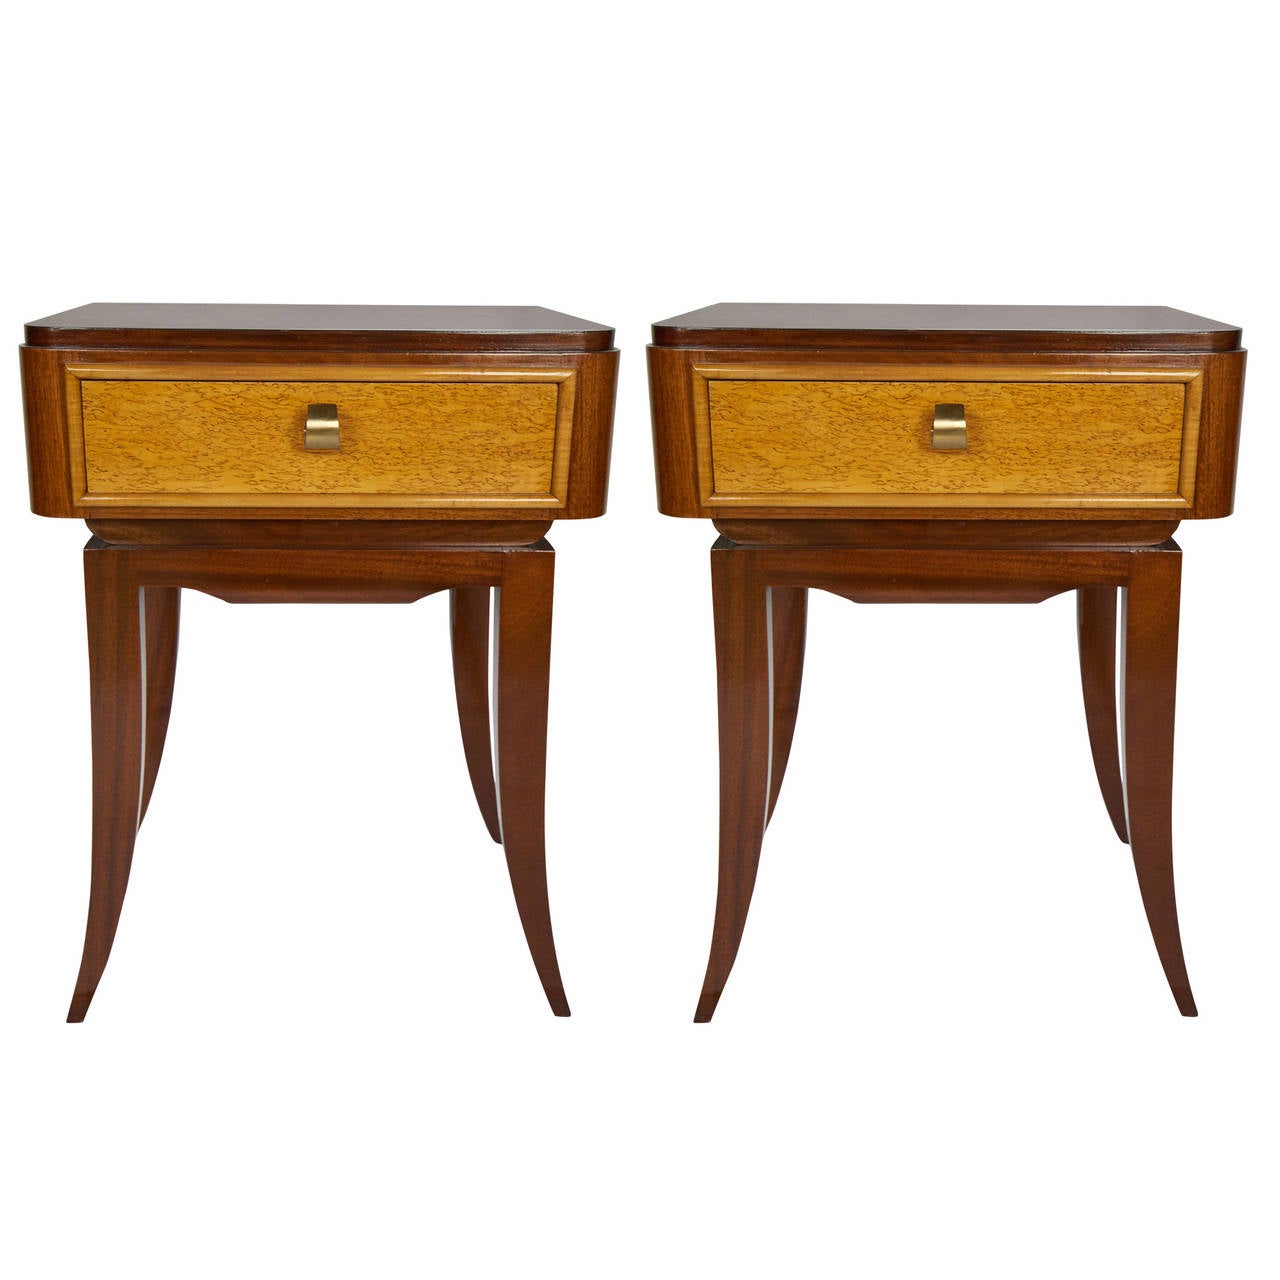 Slender solid wood legs and rosewood body, the drawer is in blonde birch, handles on cast brass. 
Price is for two.